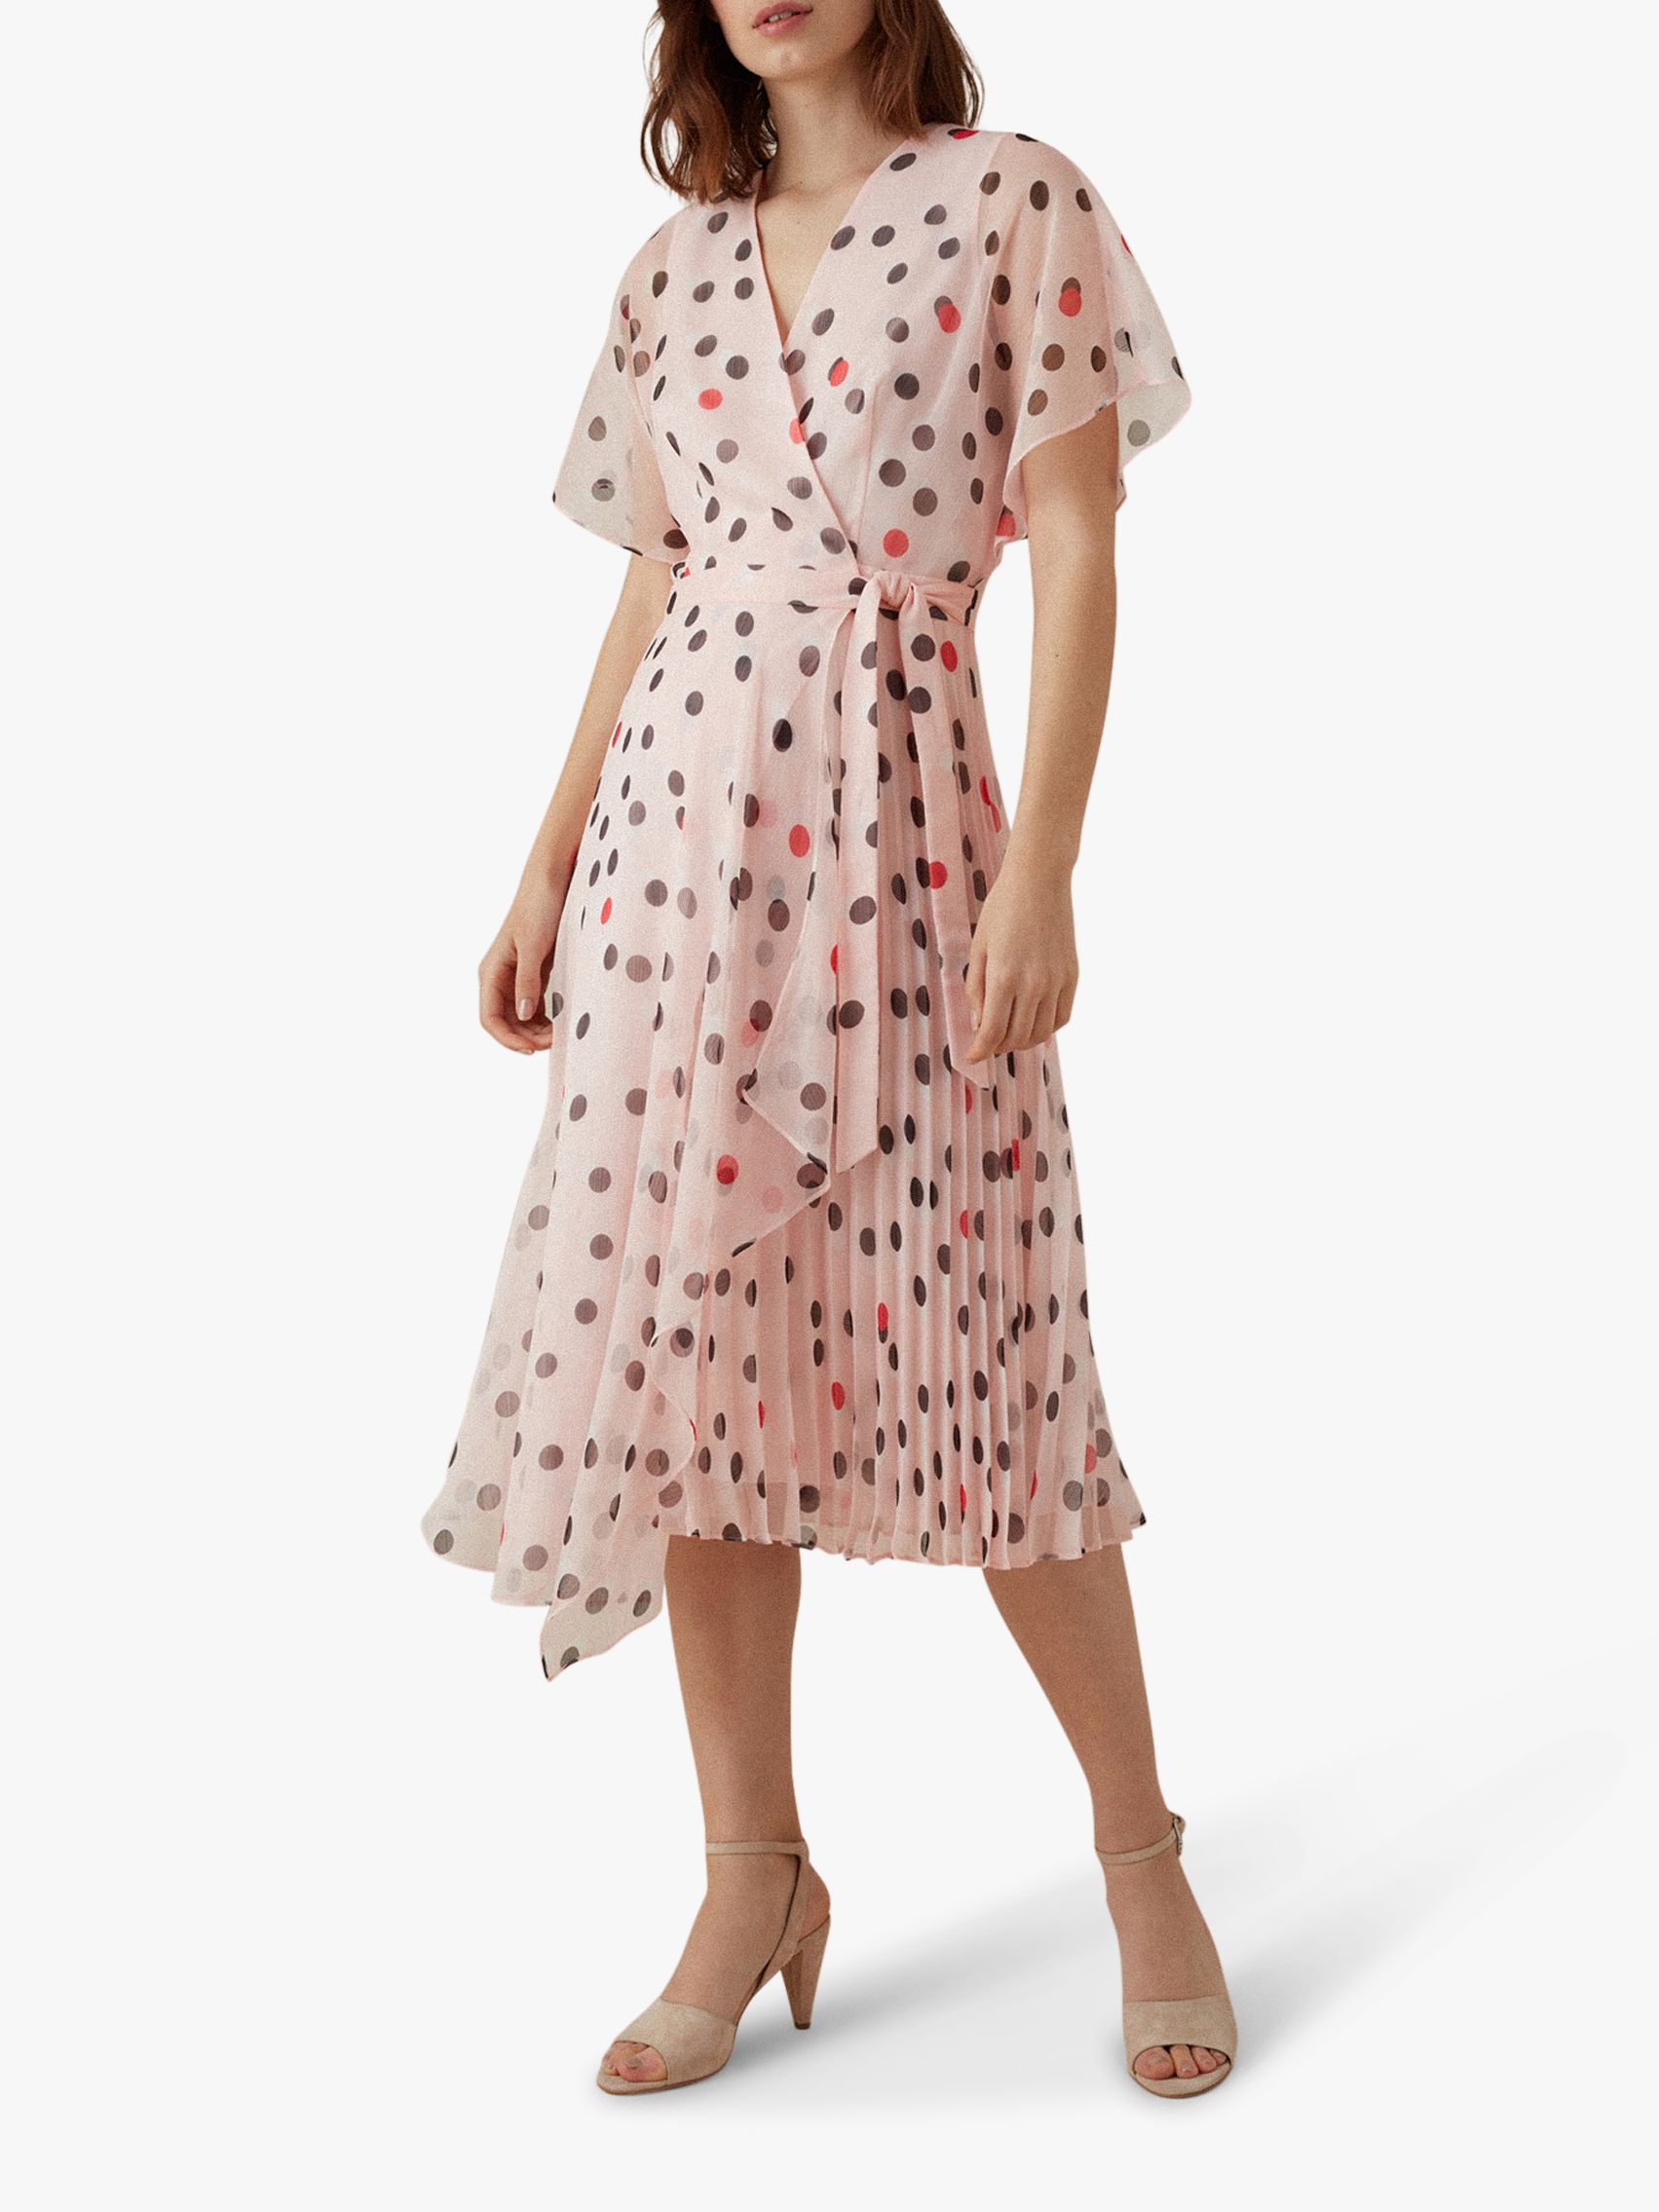 spotted dresses online